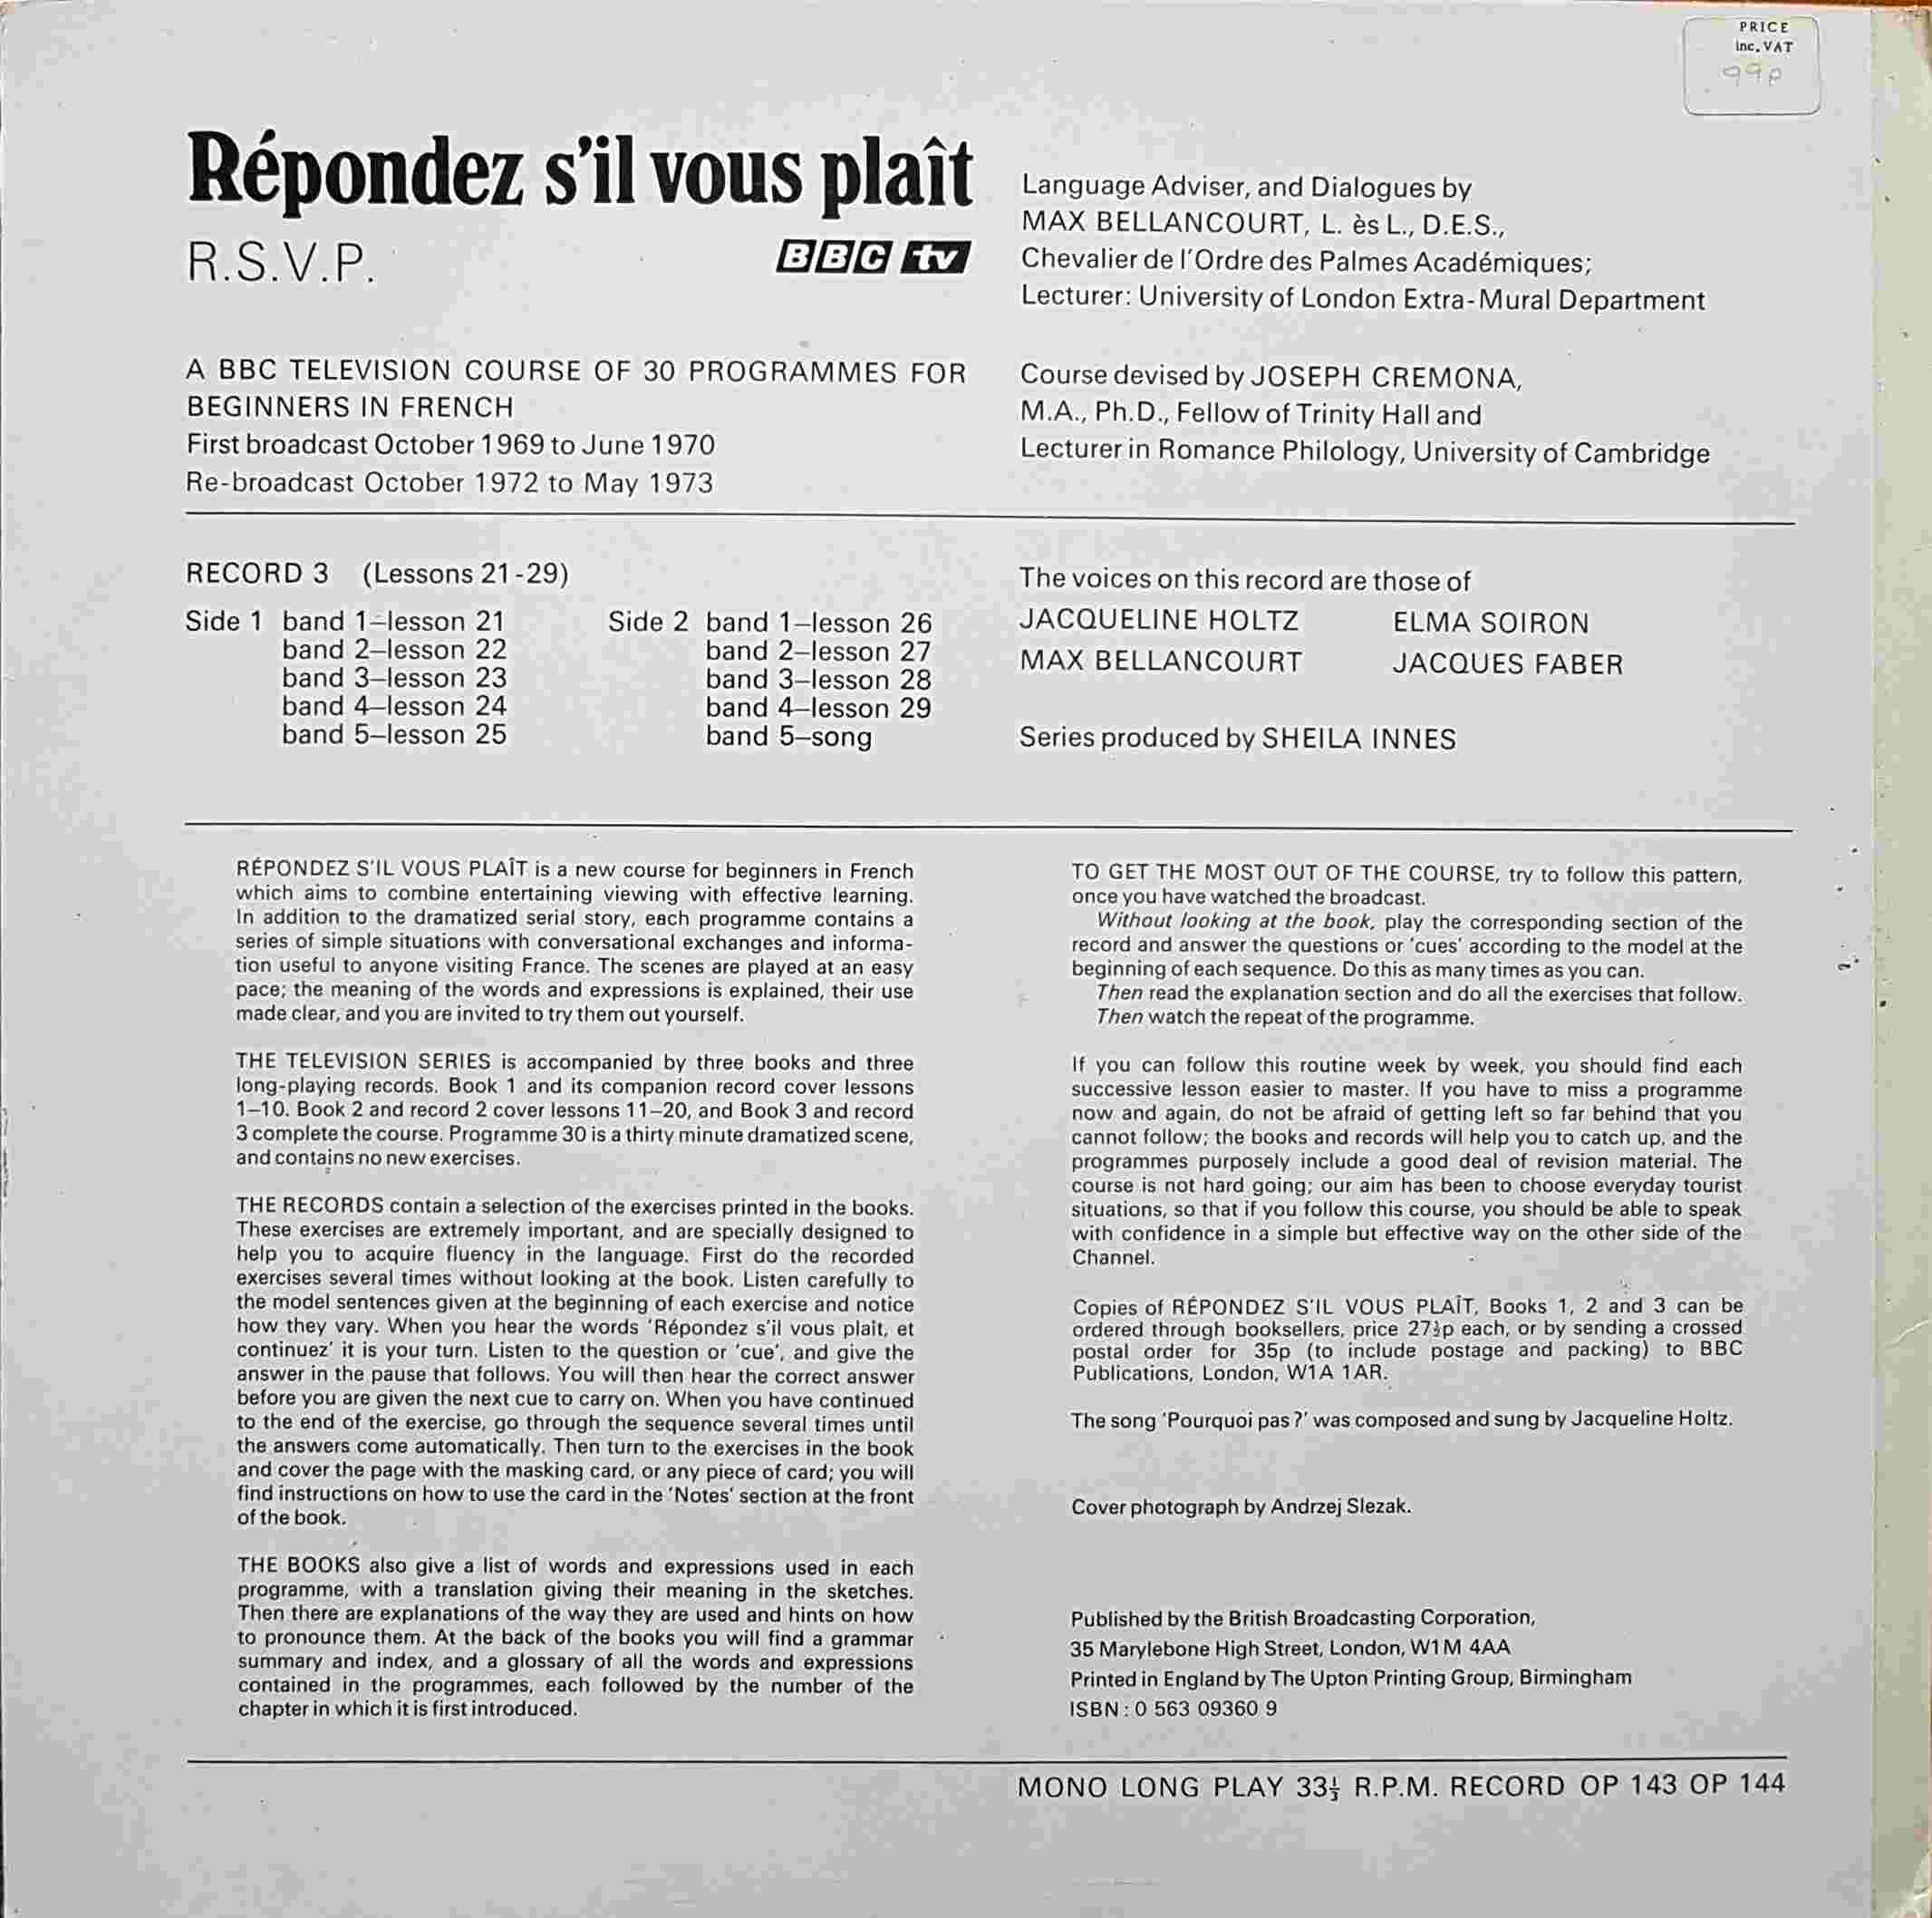 Picture of OP 143/144 Respondez s'll vous plait R. S. V. P. - Lessons 21 - 29 by artist Max Bellancourt / Joseph Cremona from the BBC records and Tapes library